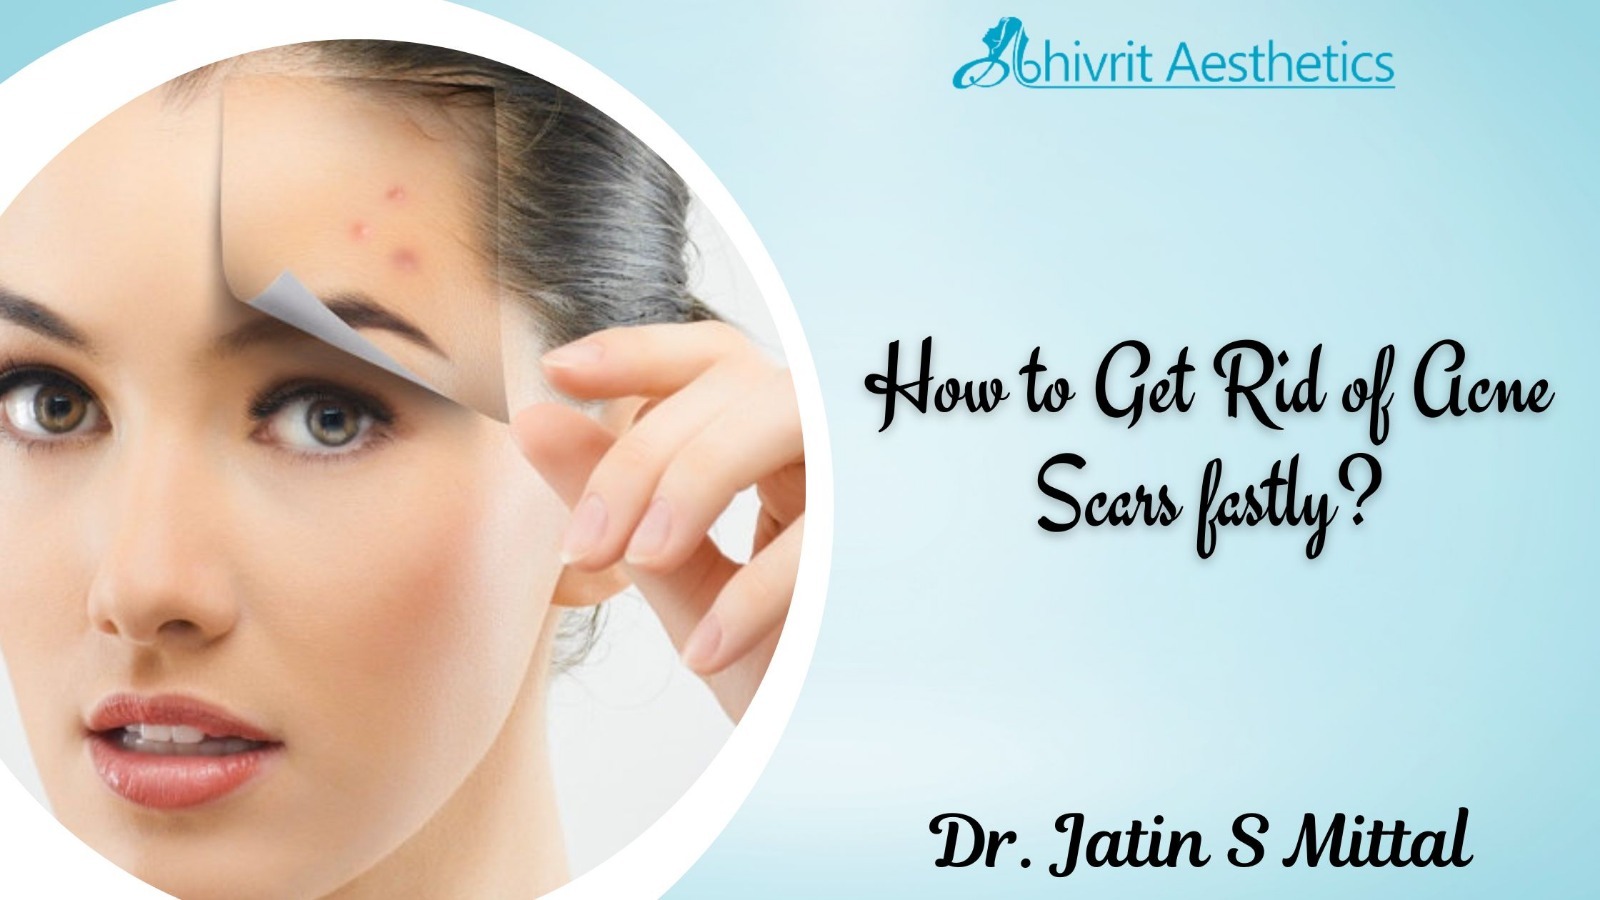 <strong>How to Get Rid of Acne Scars fastly?</strong>